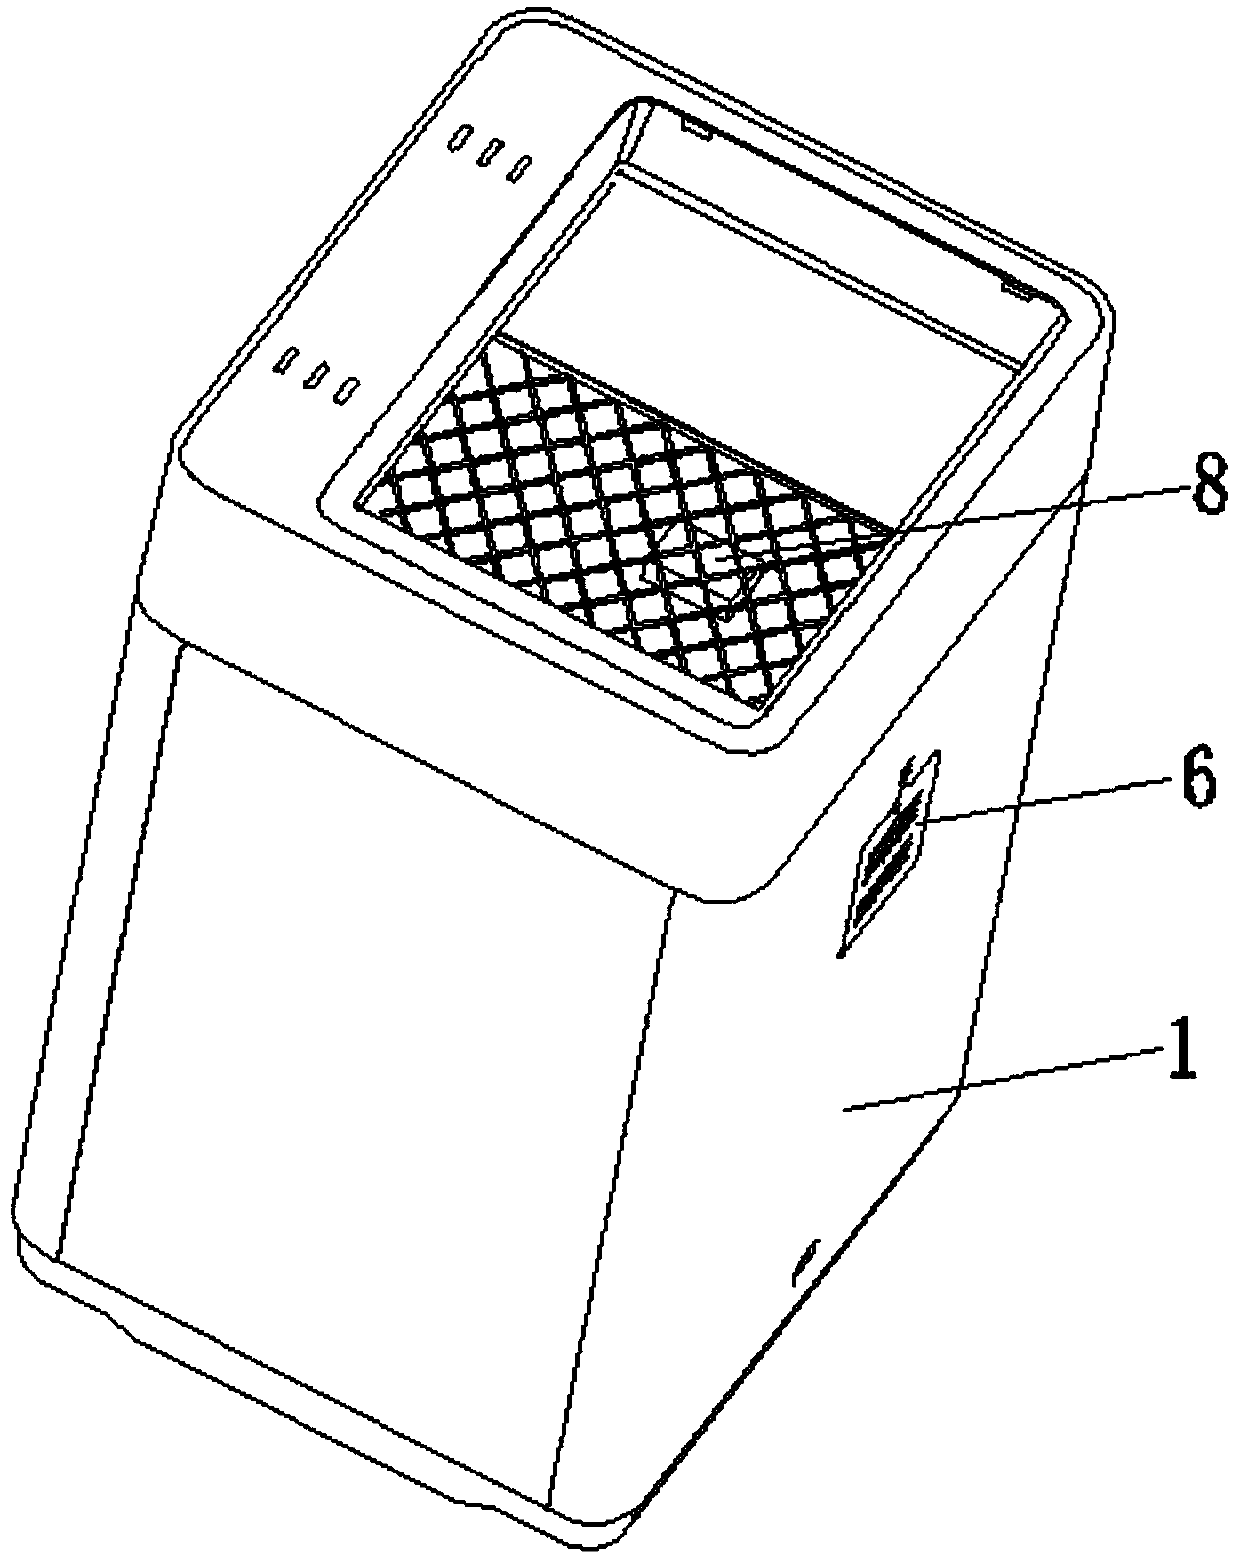 Air purifier with sensor for monitoring formaldehyde